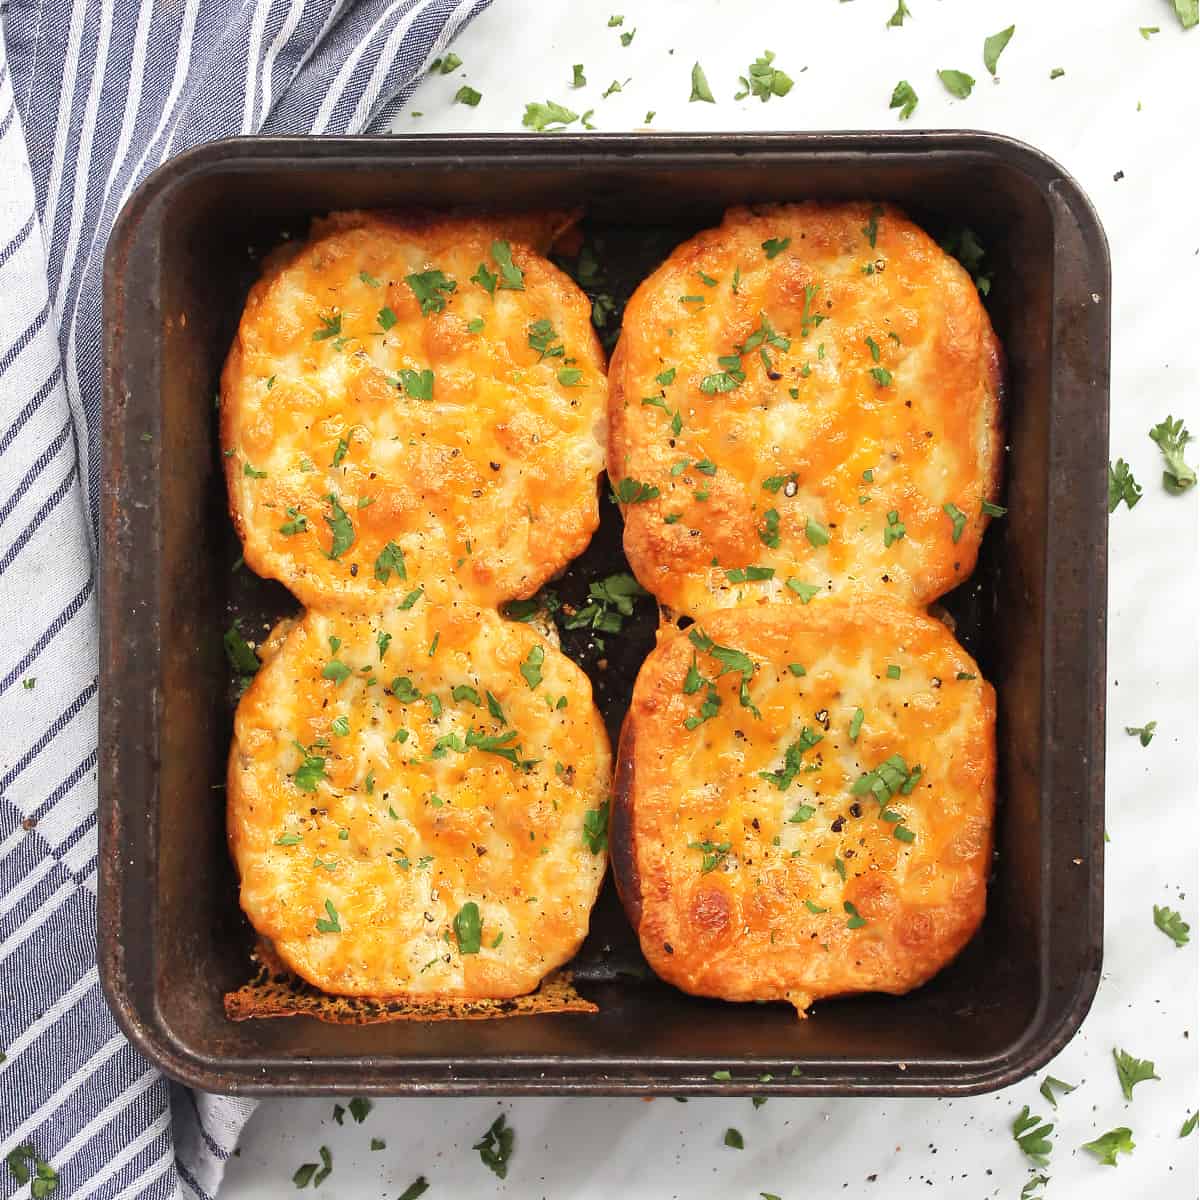 Four pieces of garlic bread in a baking tin garnished with herbs